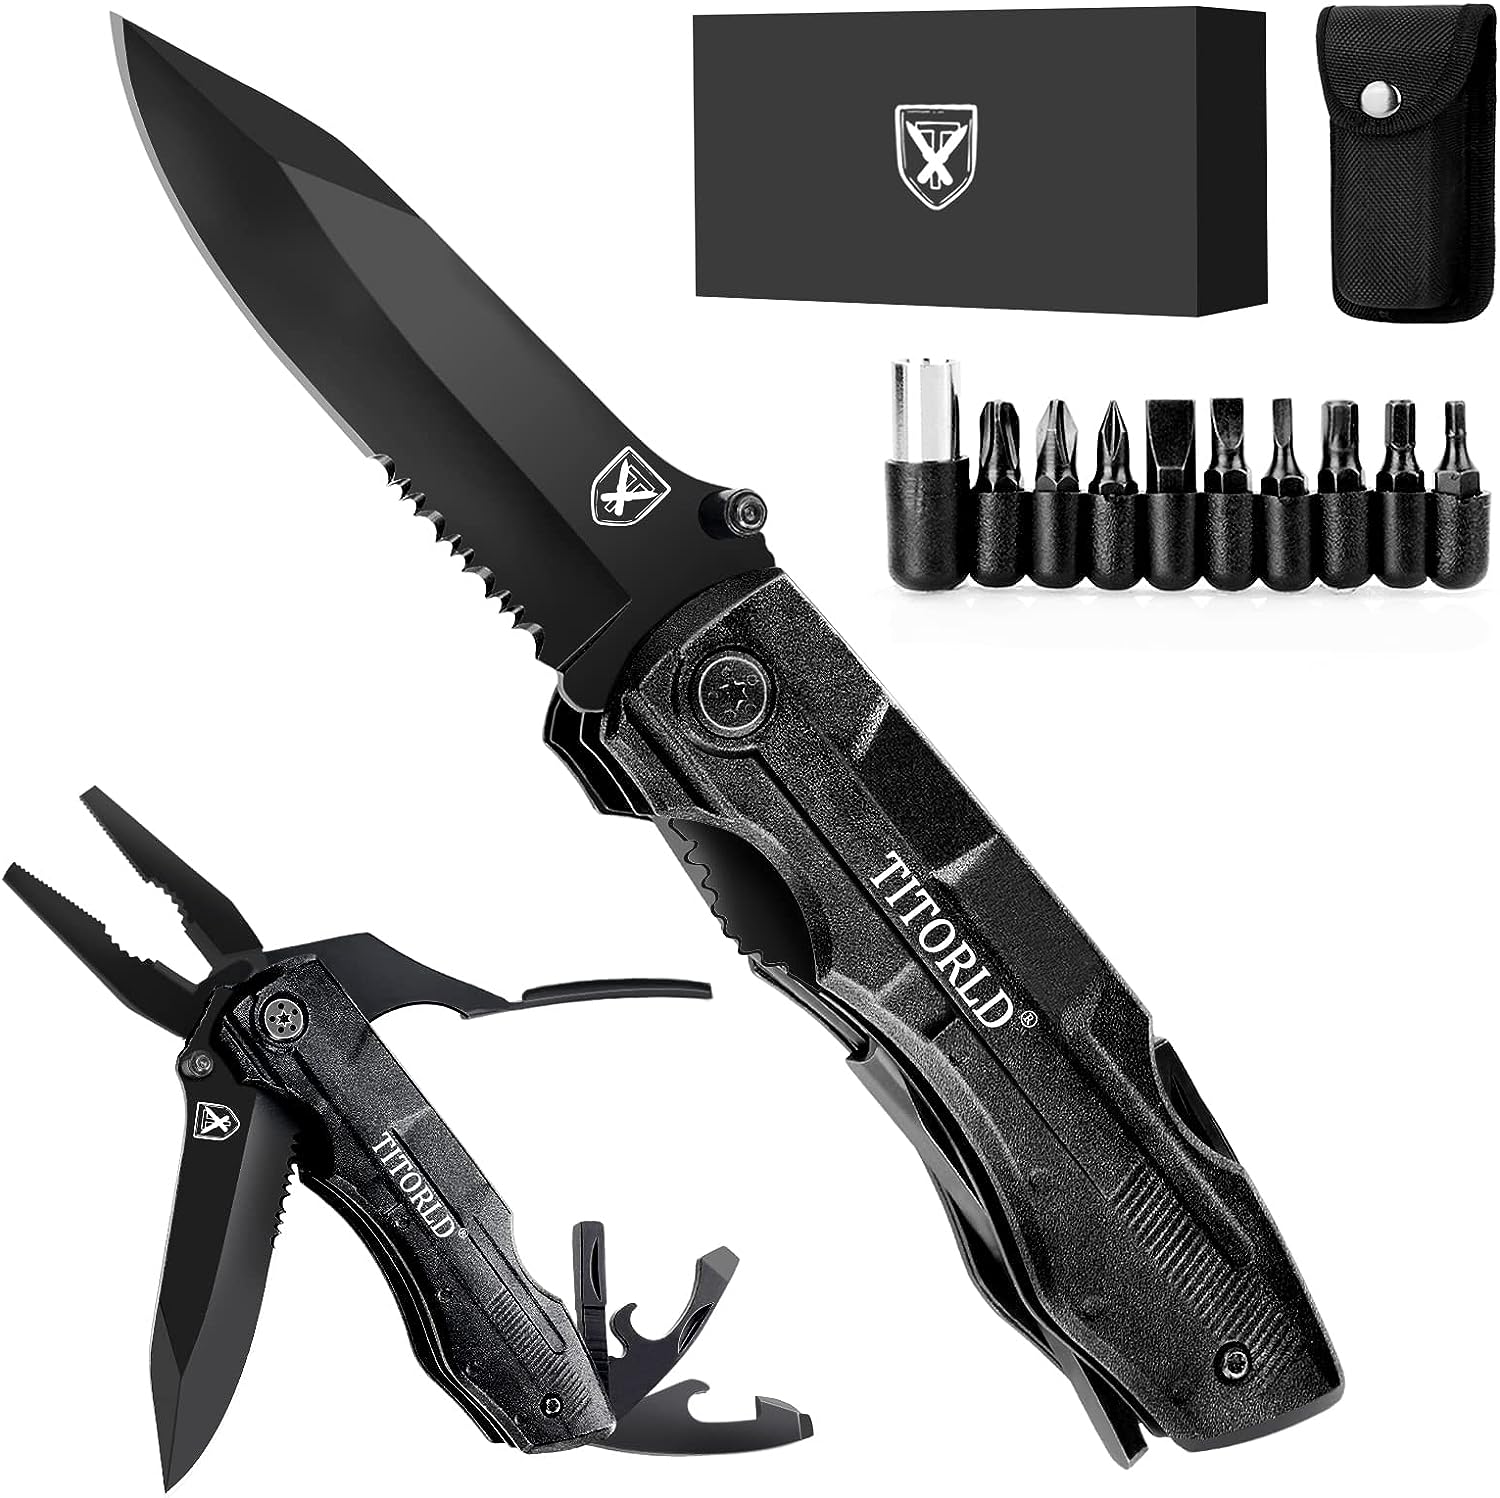 Gifts for Men Dad, Men Stocking Stuffers, Christmas Birthday Gifts, Pocket Knife Multitool, Best DAD Ever Cool Folding Knife, Unique Outdoor Camping Hiking Fishing Tools Gift Ideas